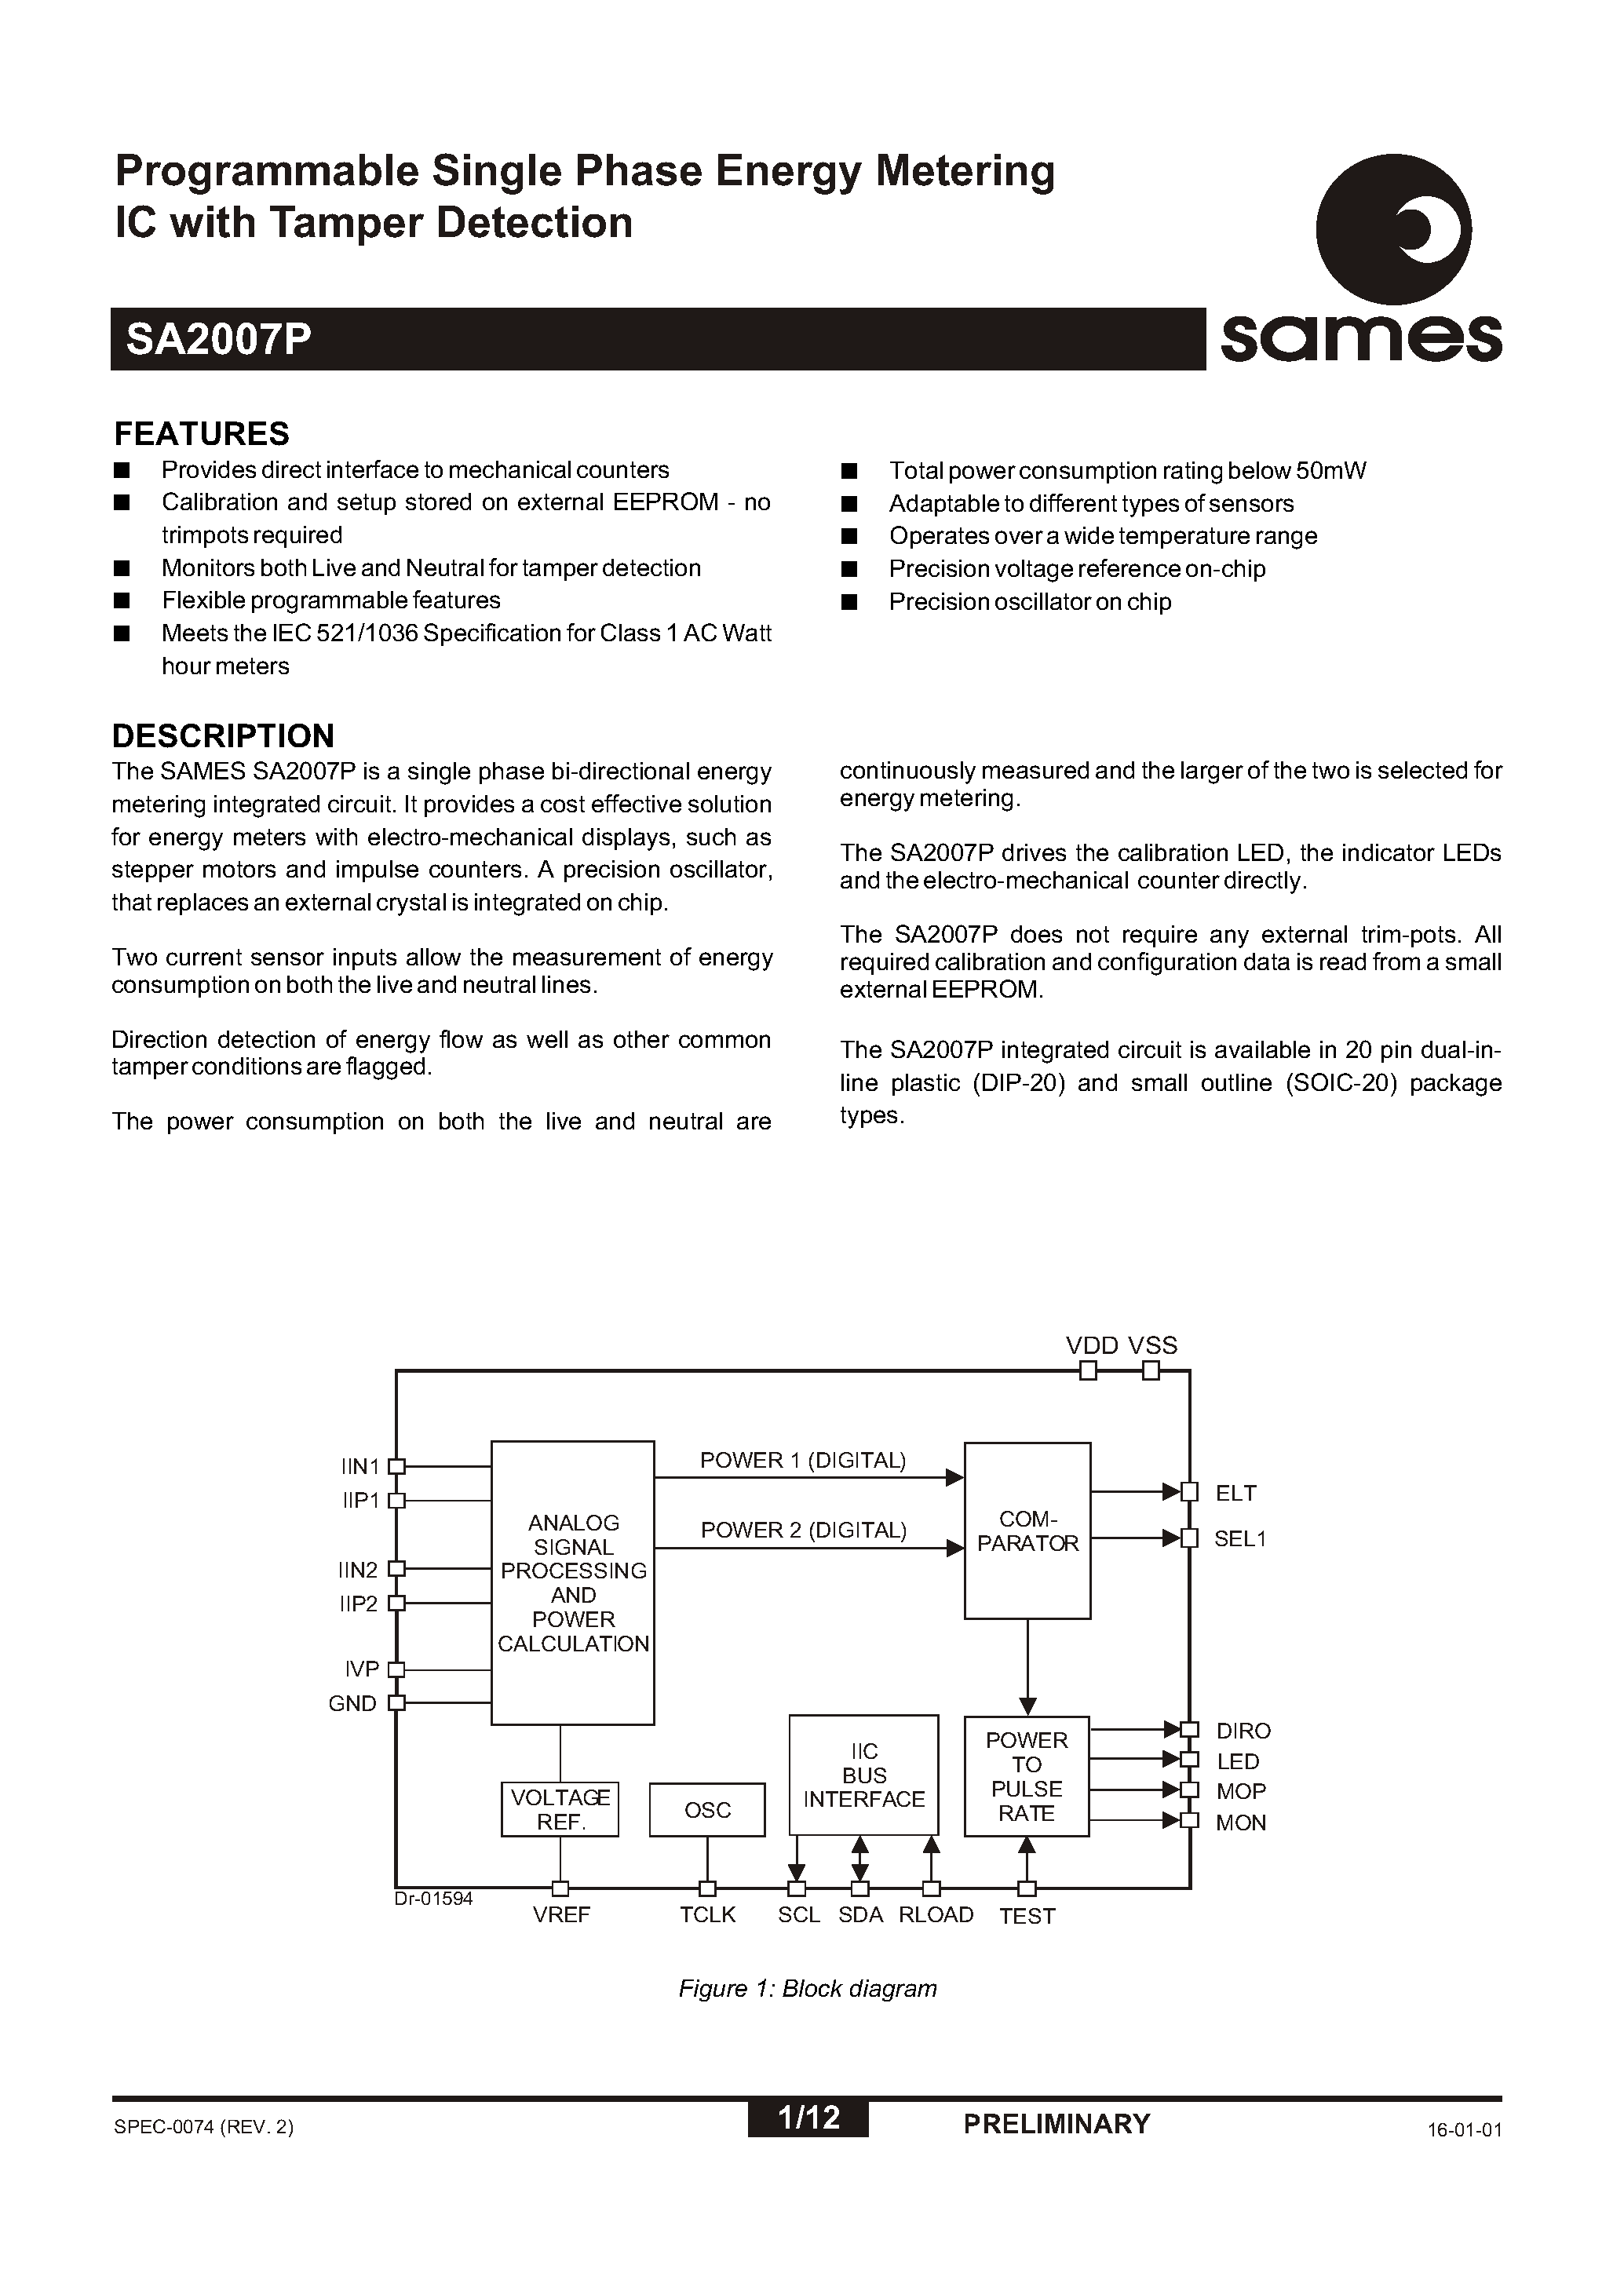 Datasheet SA2007PSA - Programmable Single Phase Energy Metering IC with Tamper Detection page 1